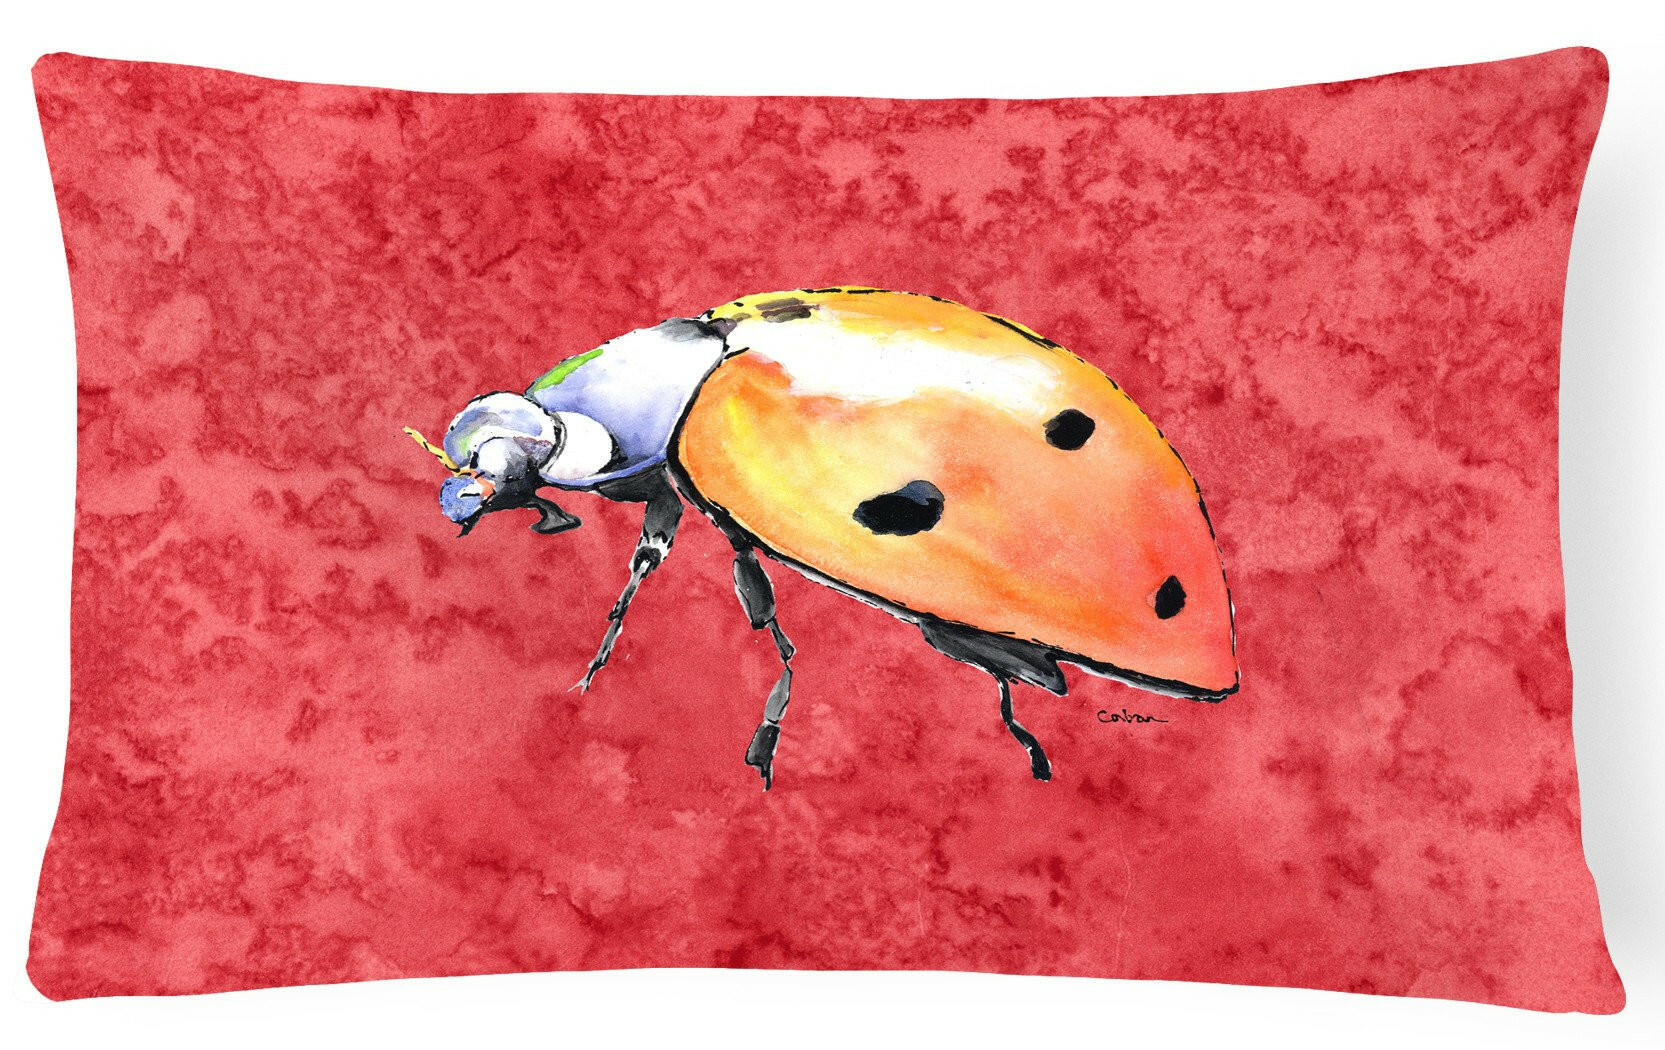 Lady Bug on Red   Canvas Fabric Decorative Pillow by Caroline's Treasures